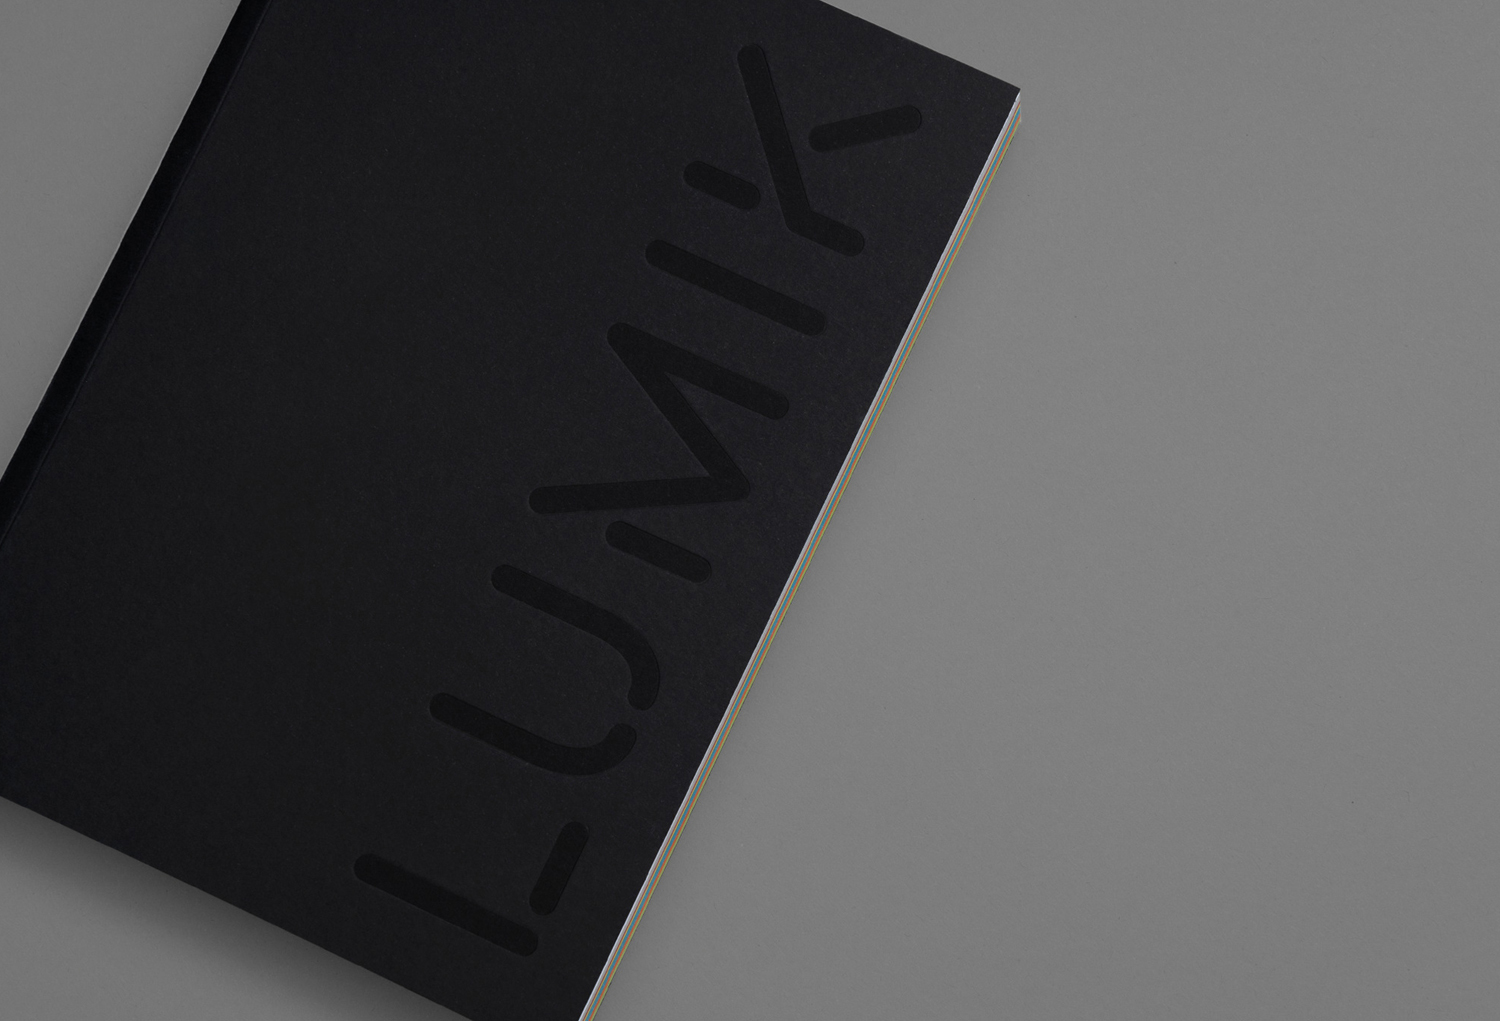 Logotype and brochure design by Hey for Spanish lighting design and manufacturing company Lumik